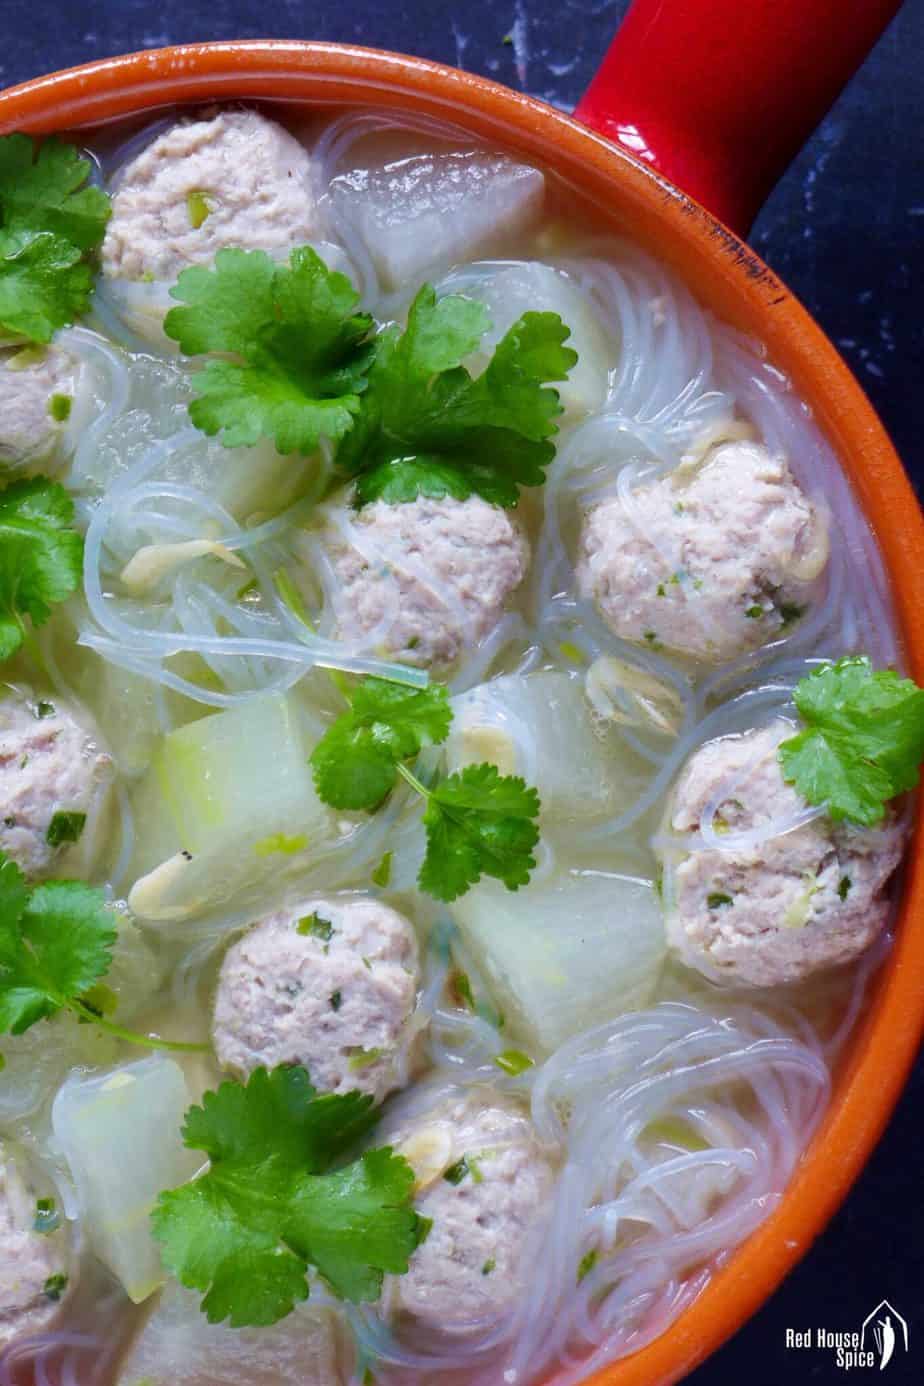 Winter Melon Soup with Meatballs (冬瓜丸子汤) - Red House Spice